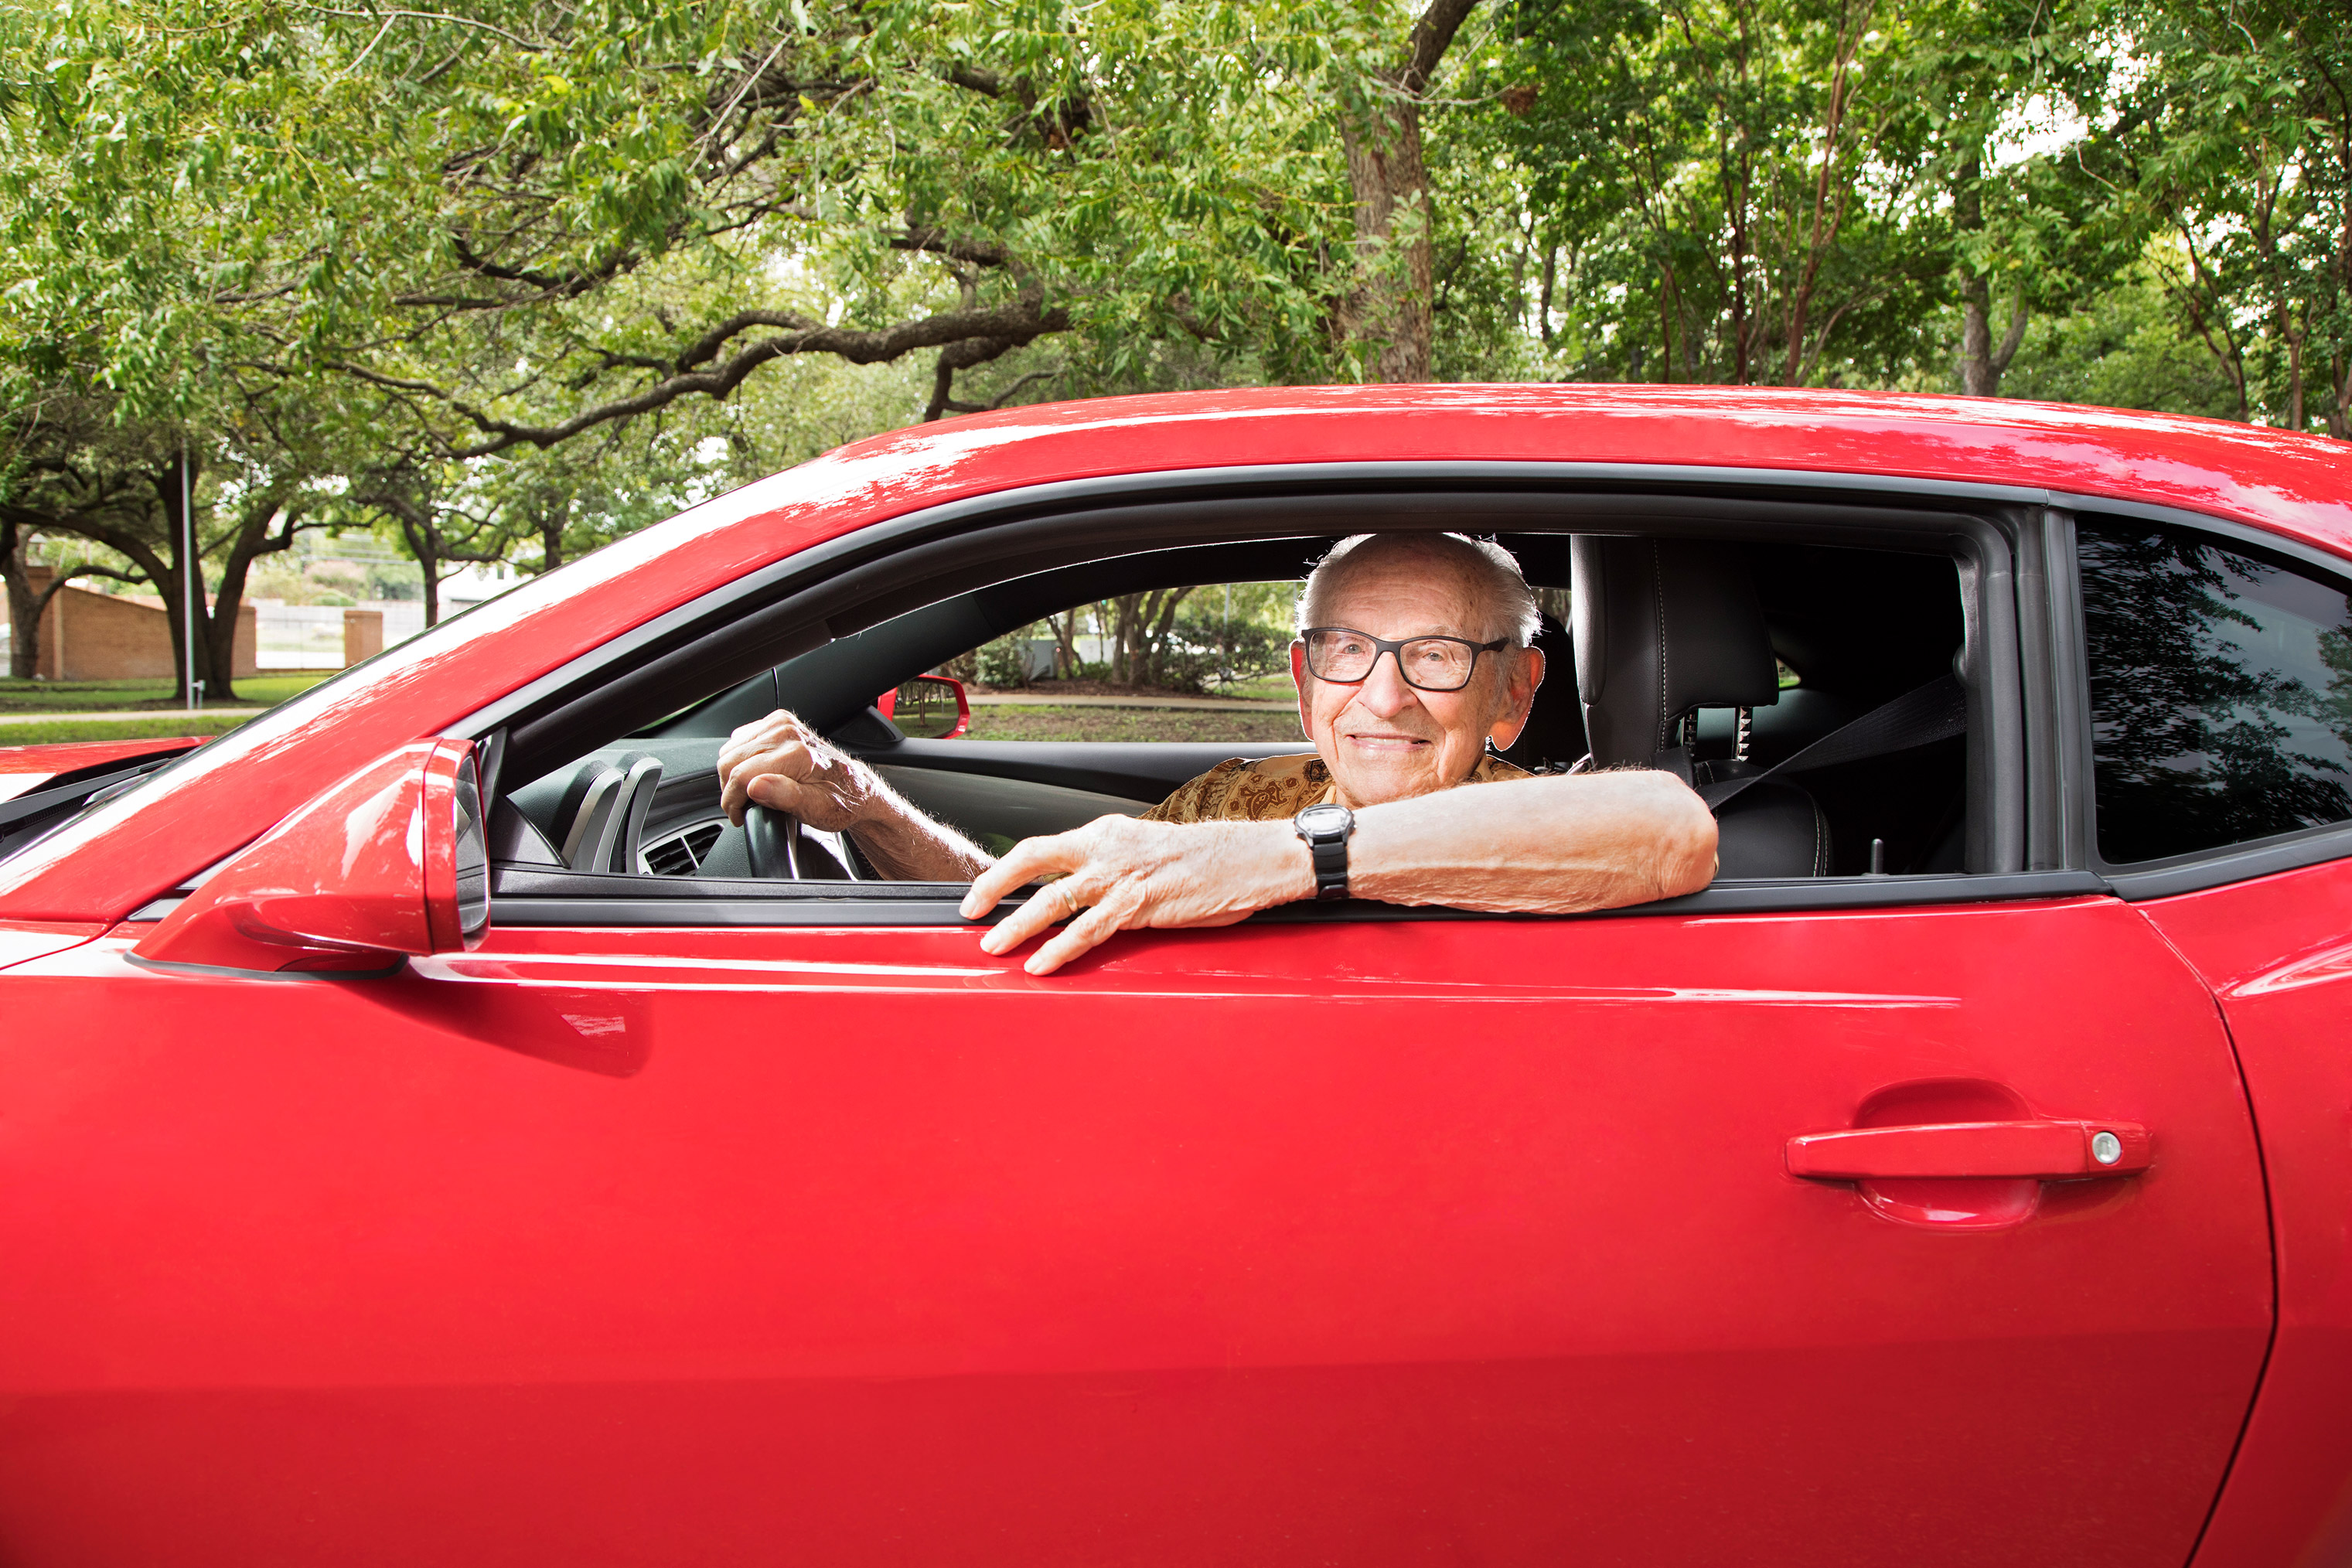 Orville Rogers, age 100, in his cherished 2013 Chevy Camaro, is still cruising after 40 years of retirement.